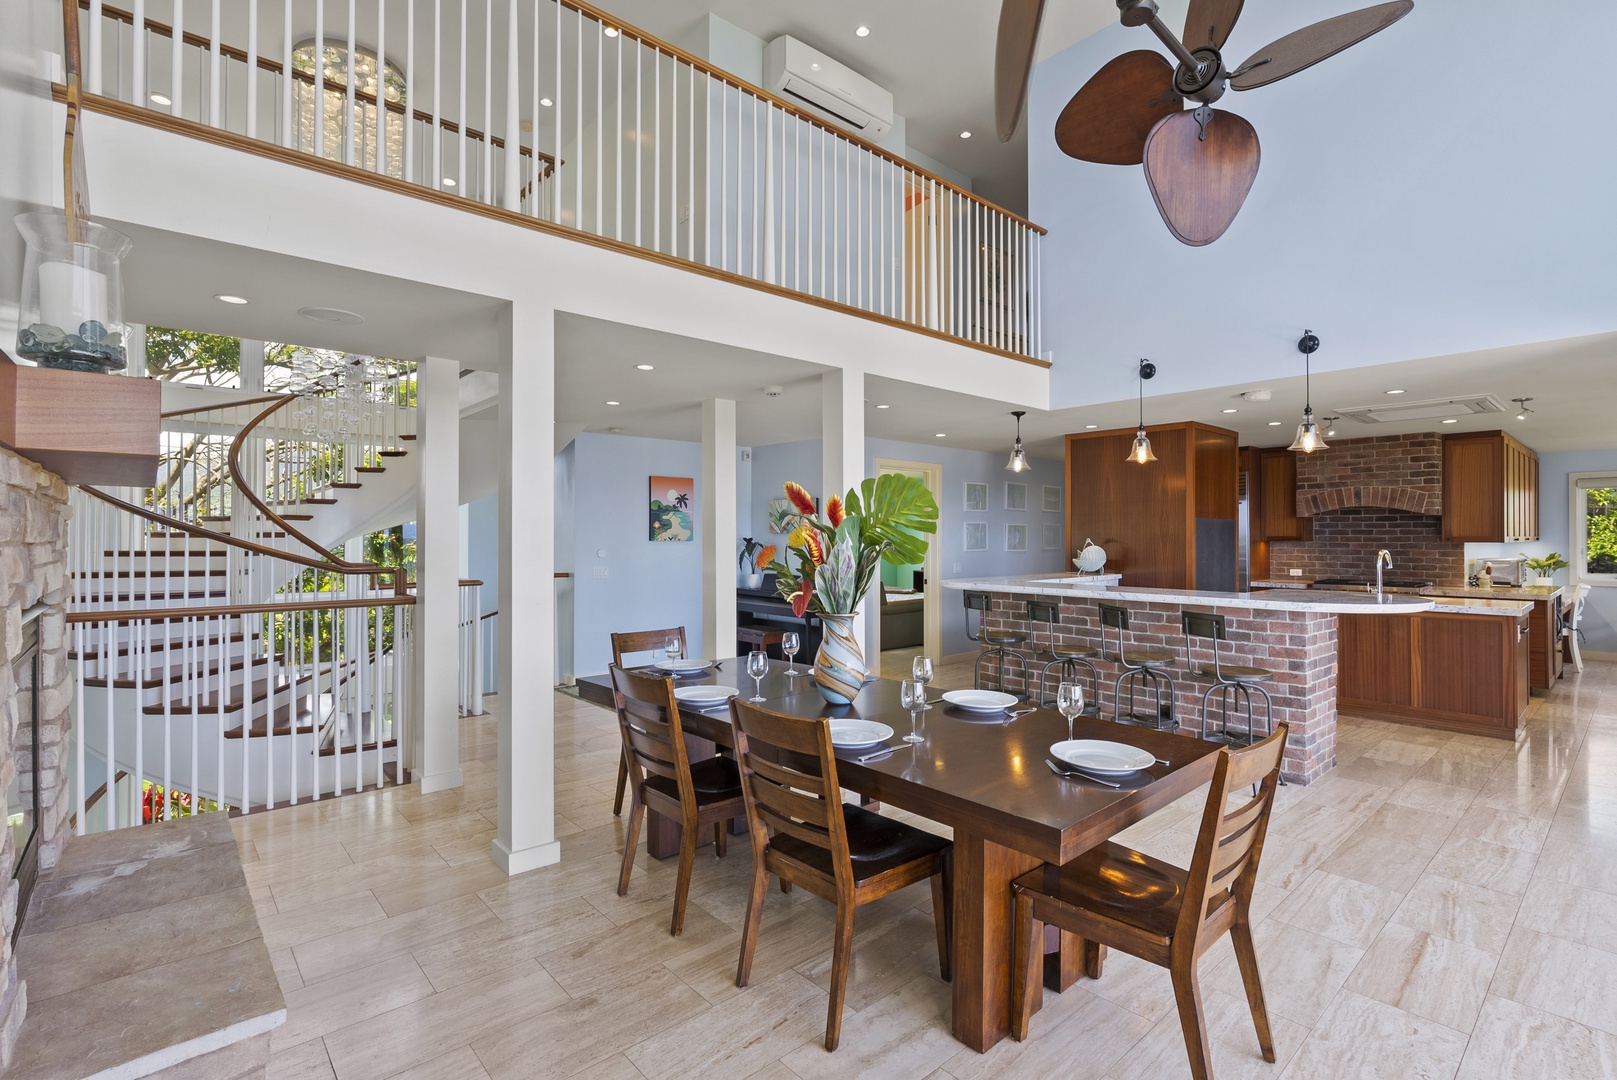 Waialua Vacation Rentals, Waialua Beachfront Getaway - Spacious dining room to get together with friends for a good meal